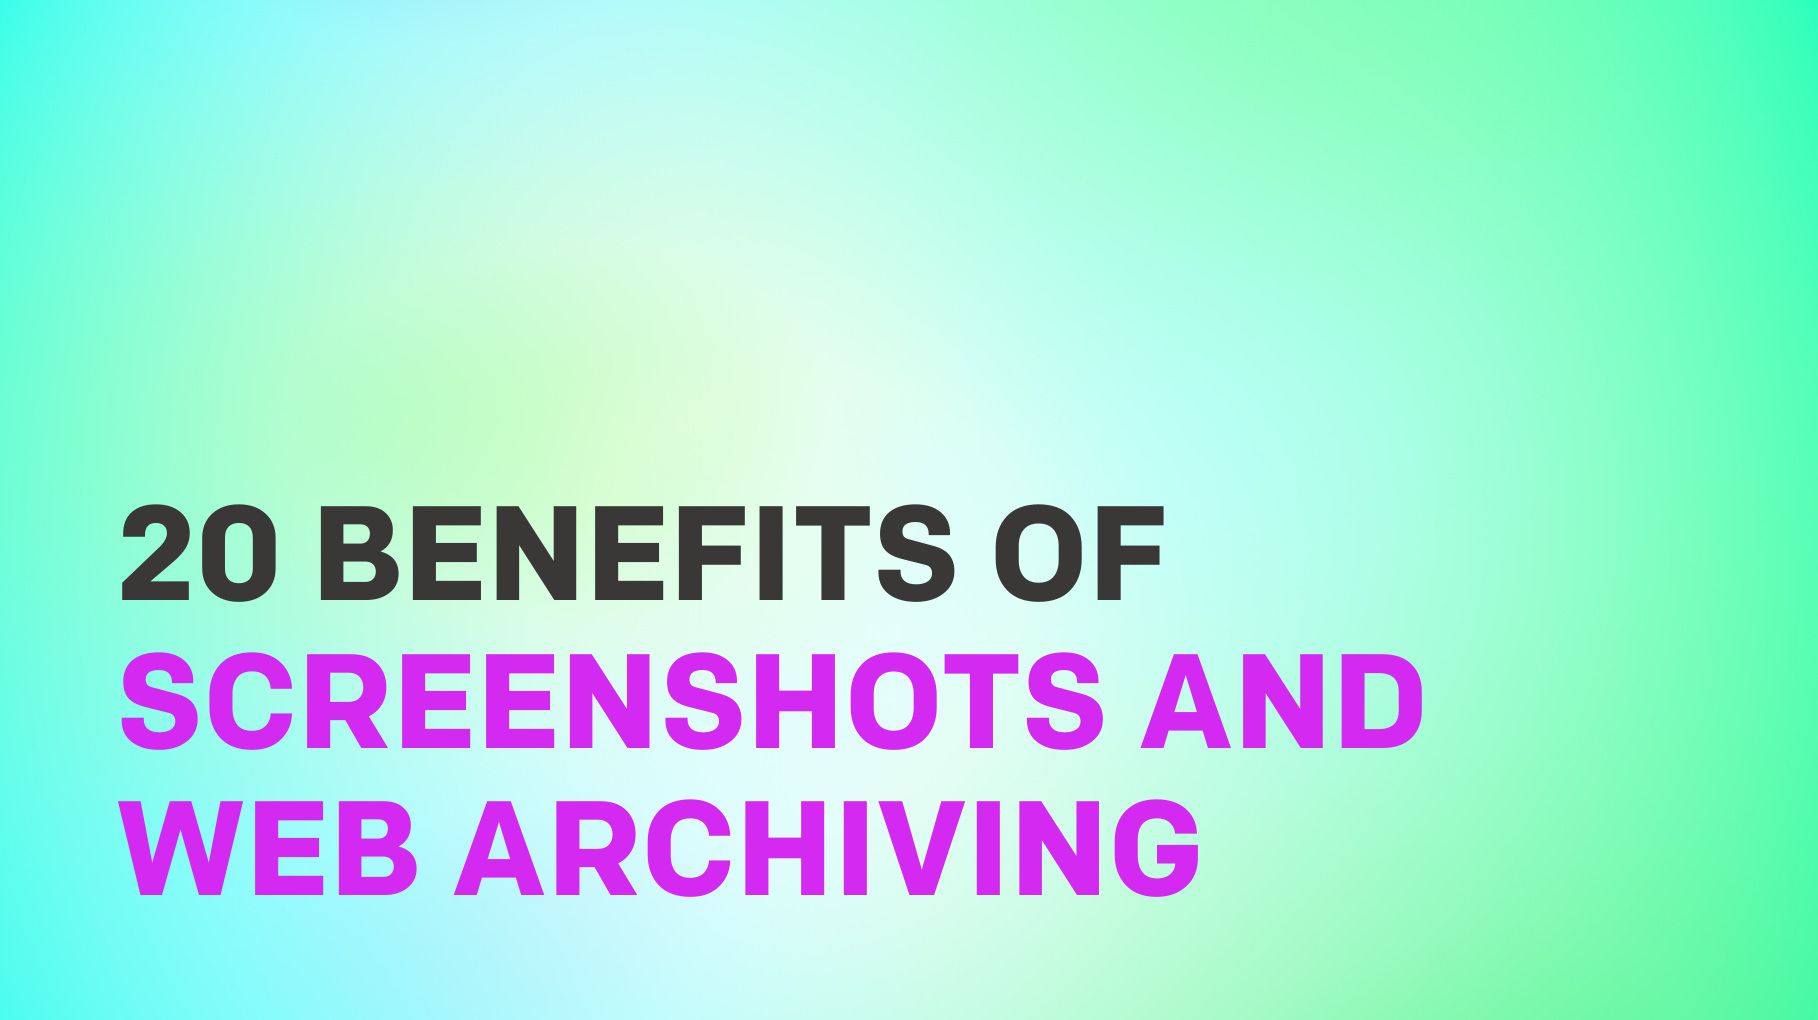 20 Benefits of Screenshots and Web Archiving to Businesses